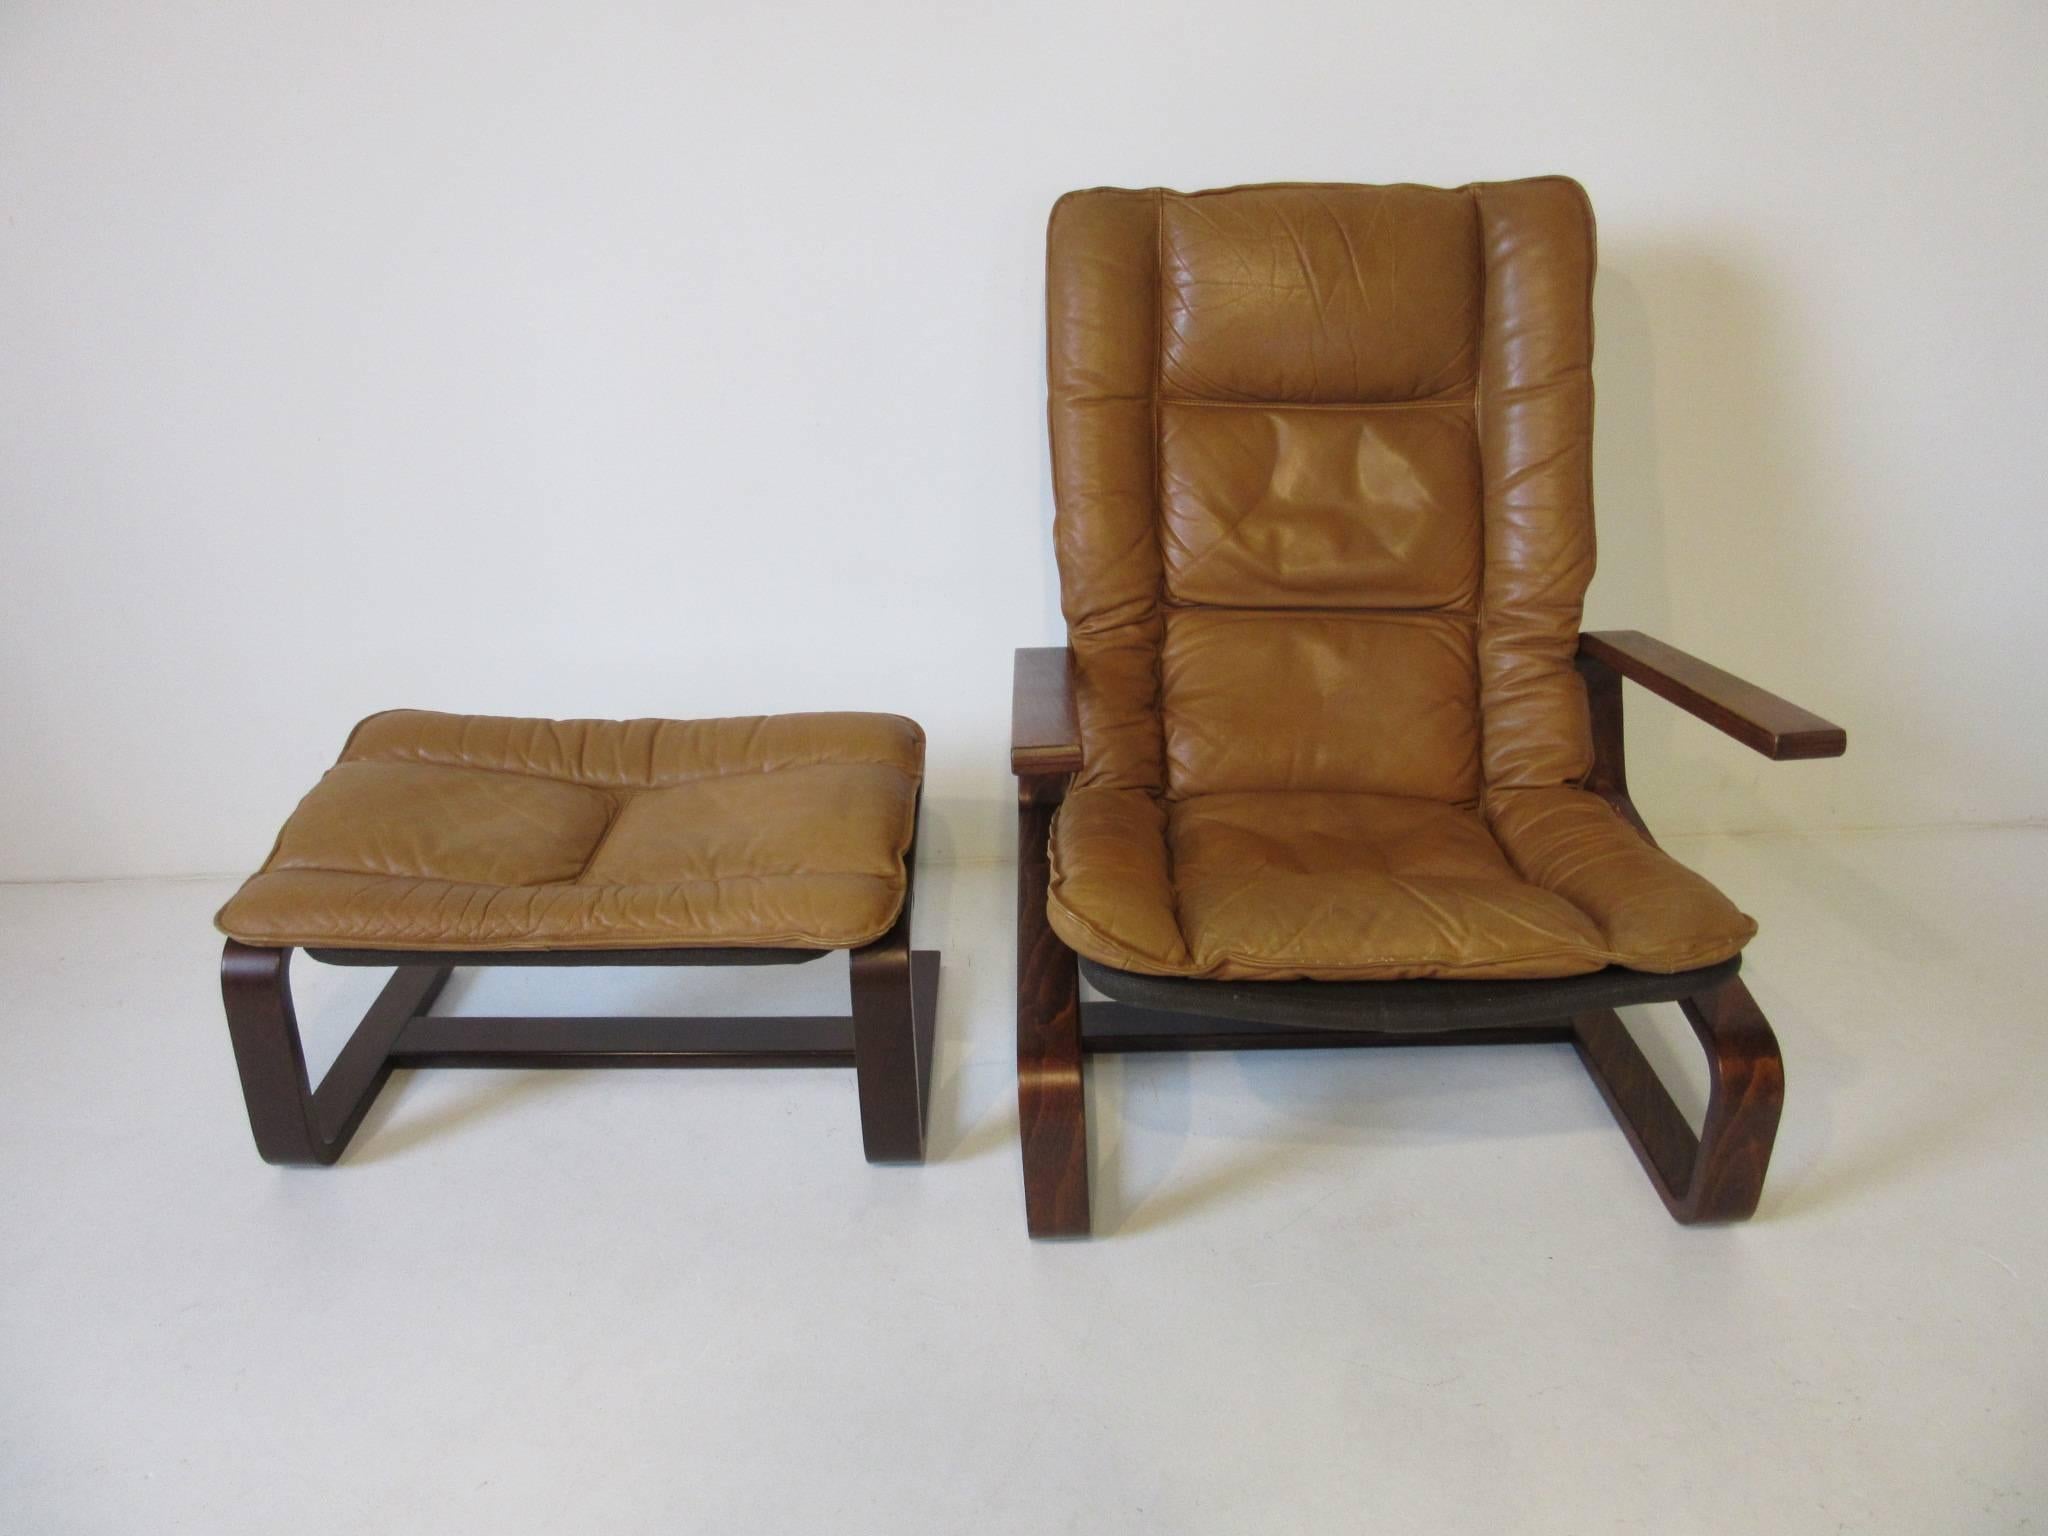 A Danish styled lounge chair with matching ottoman sitting on a dark sculptural bentwood base, with baseball glove colored soft and warm leather. Retains the manufactures labels made in Norway by the Westnofa Furniture company. The measurement for